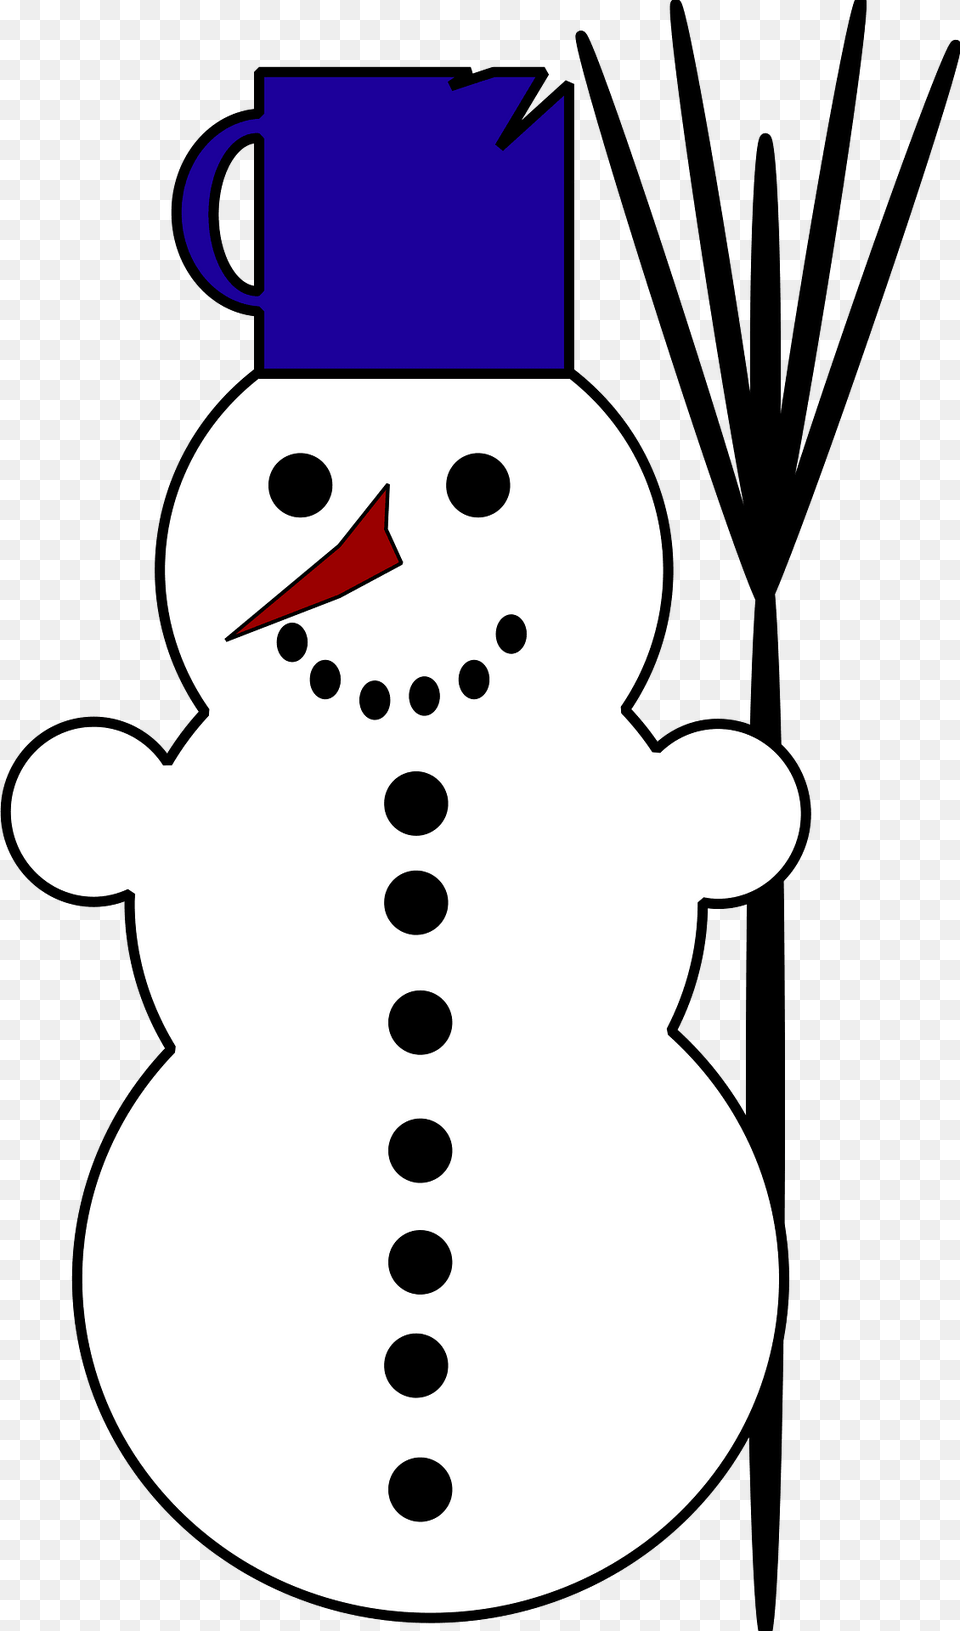 Snowman With A Blue Cup On Its Head Clipart, Nature, Outdoors, Winter, Snow Free Png